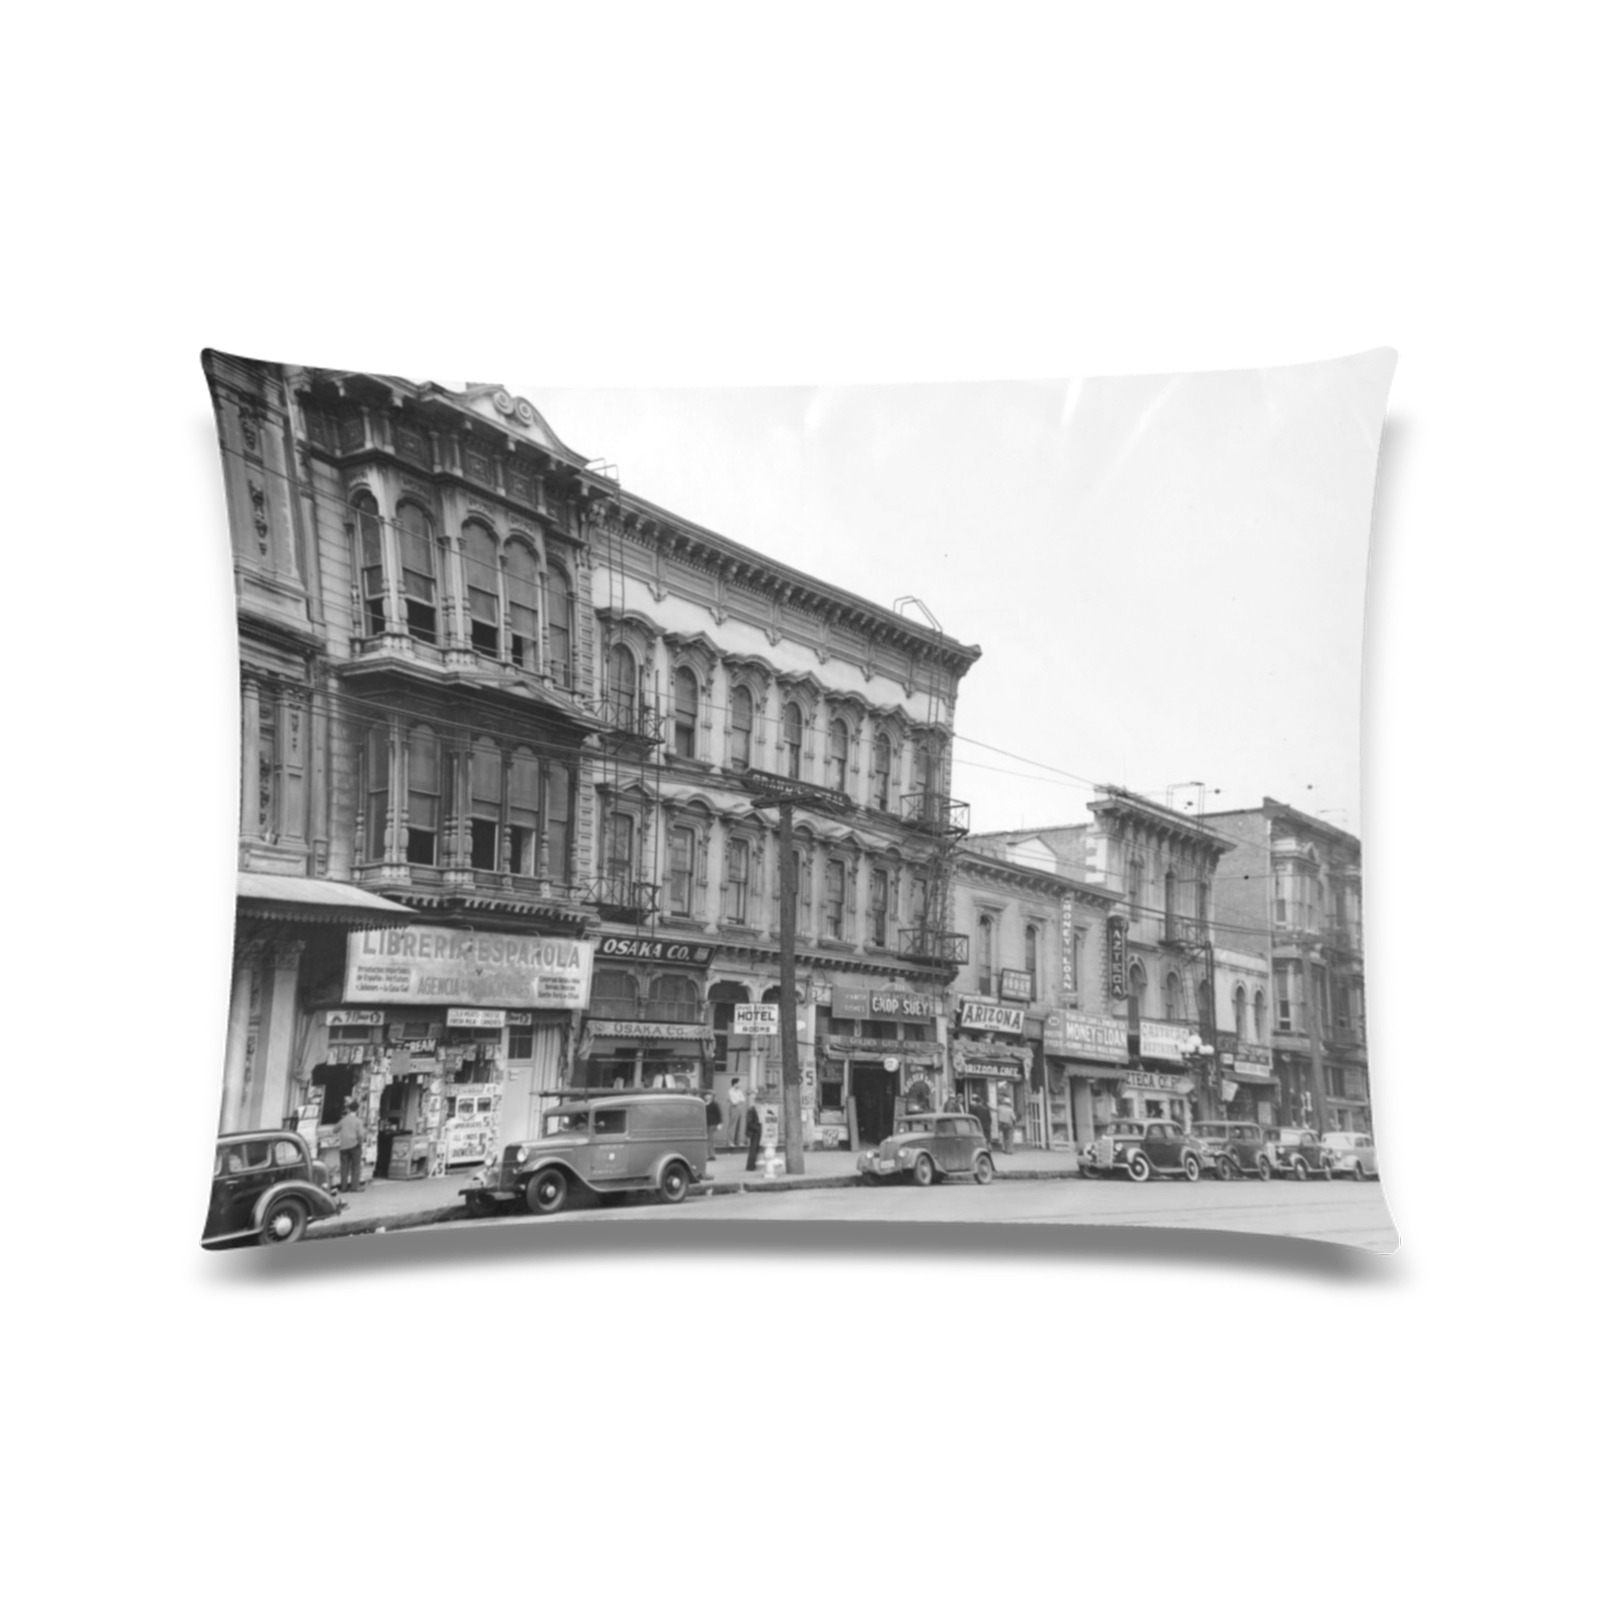 East side of Main Street Los Angeles. 1930s Custom Picture Pillow Case 20"x26" (one side)